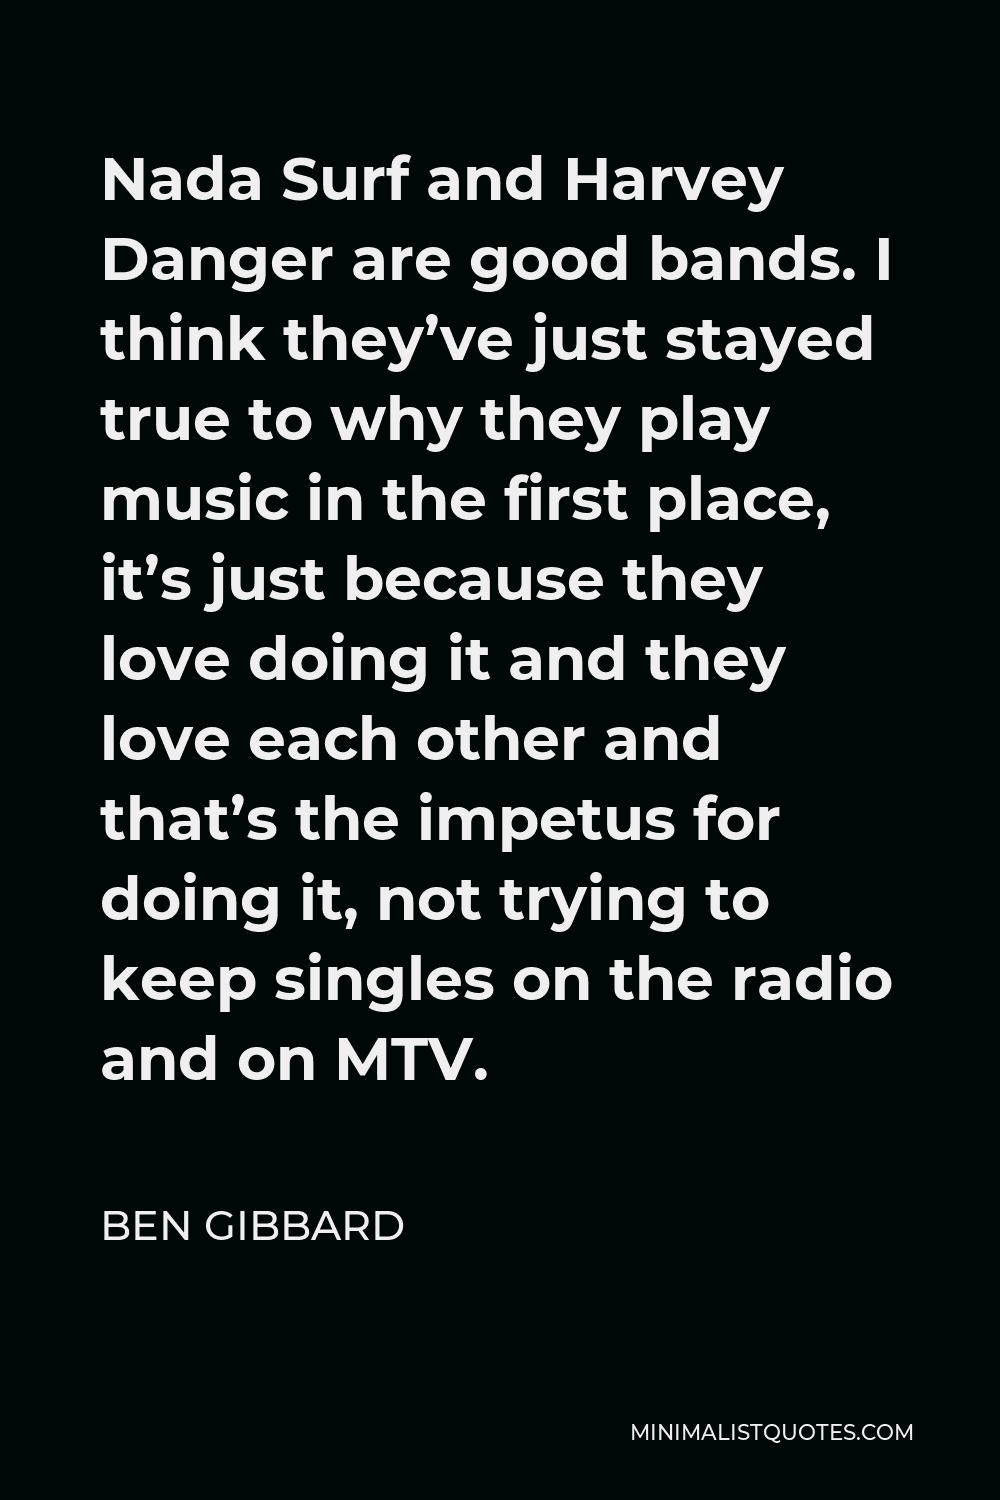 Ben Gibbard Quote - Nada Surf and Harvey Danger are good bands. I think they’ve just stayed true to why they play music in the first place, it’s just because they love doing it and they love each other and that’s the impetus for doing it, not trying to keep singles on the radio and on MTV.